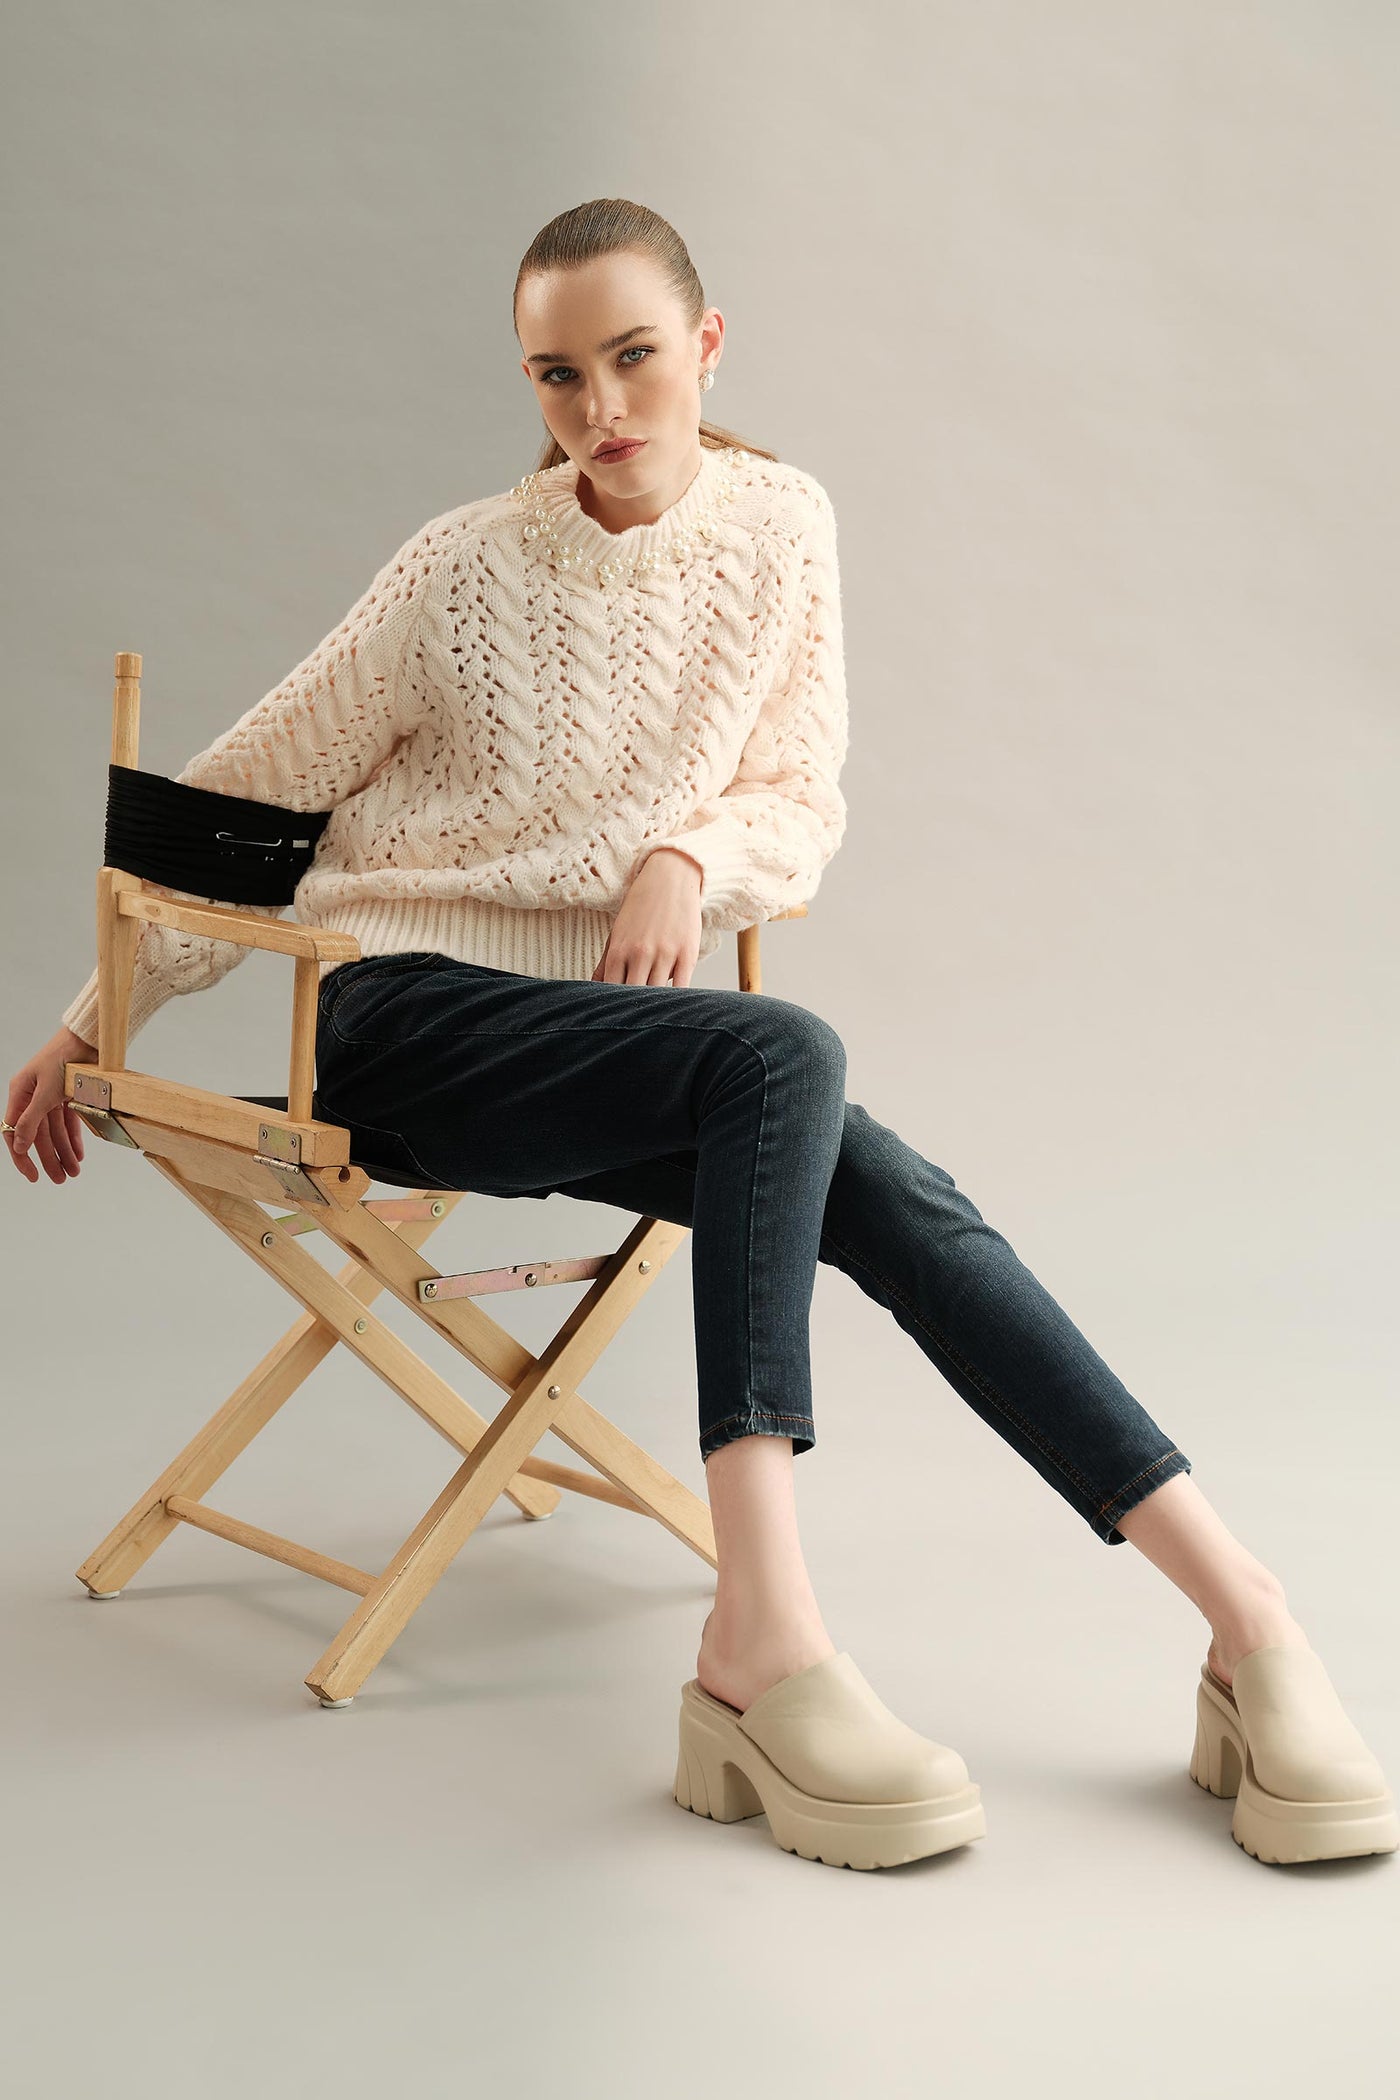 Pearl Woven Sweater (Free Size)